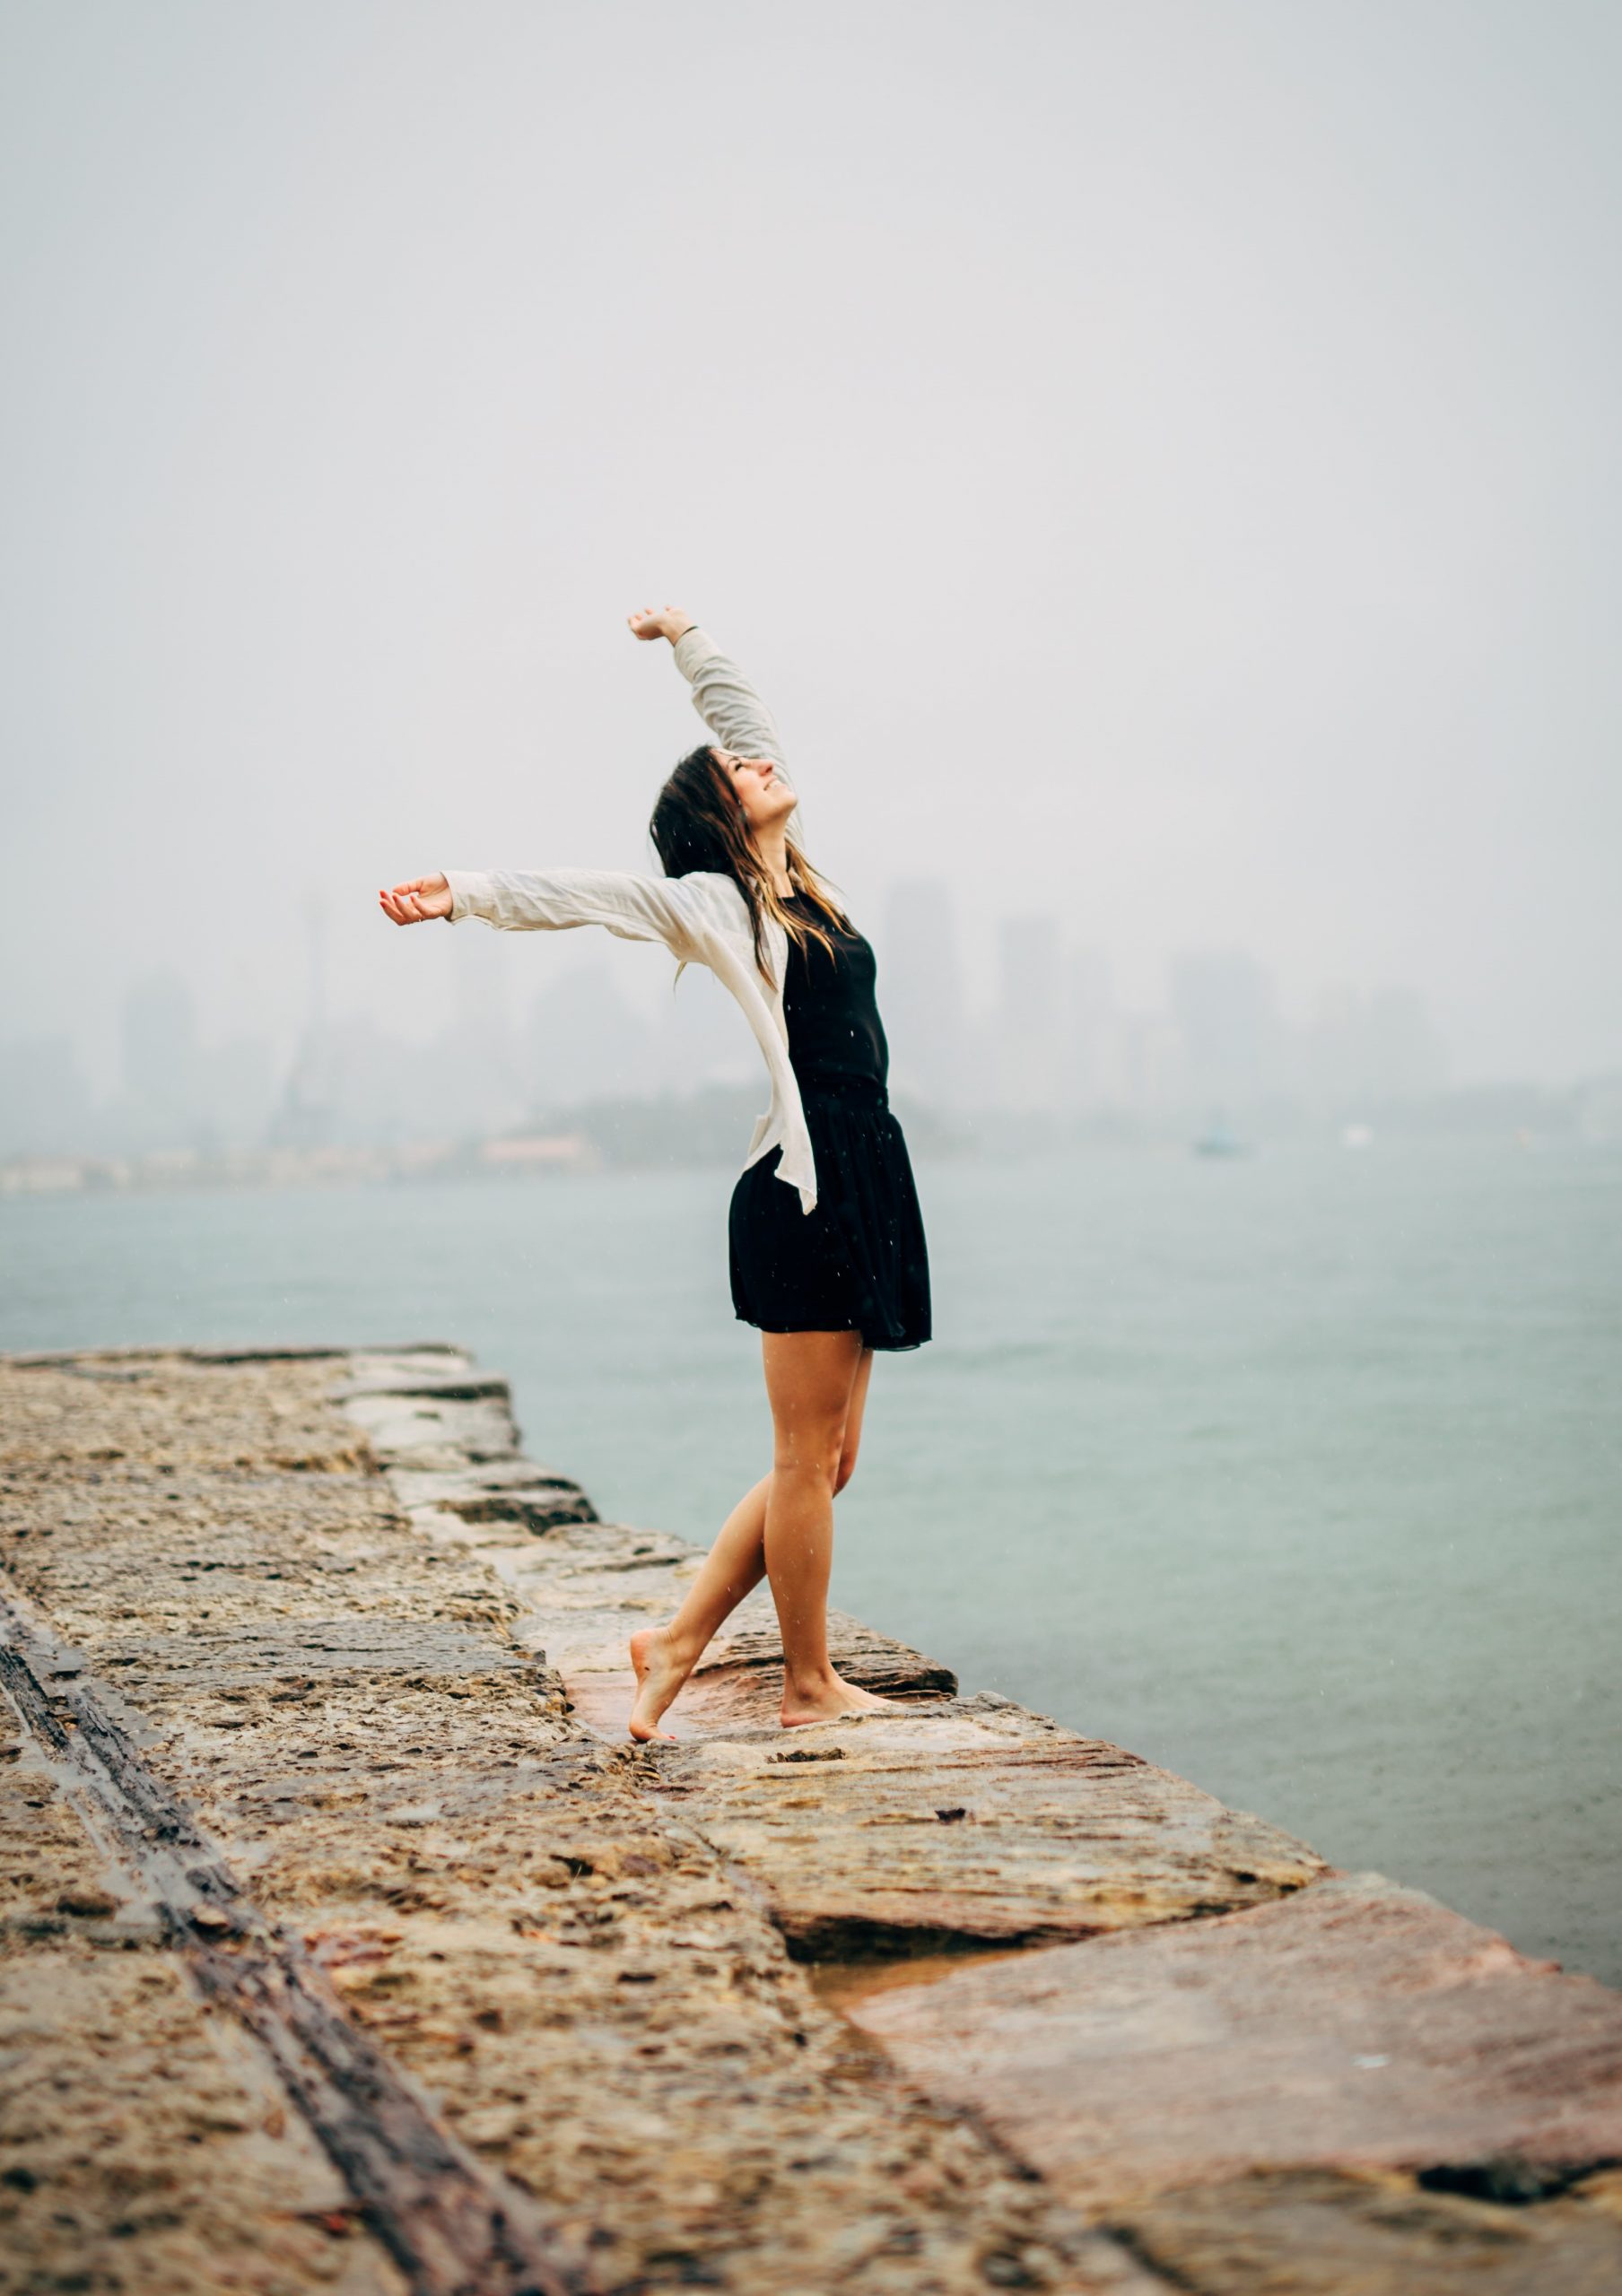 Young woman on a wall, outline of a city across the water in the background. She is reaching up and out, leaning back, looking up, opening herself to the world. Freeing Your Body brings this kind of joy.